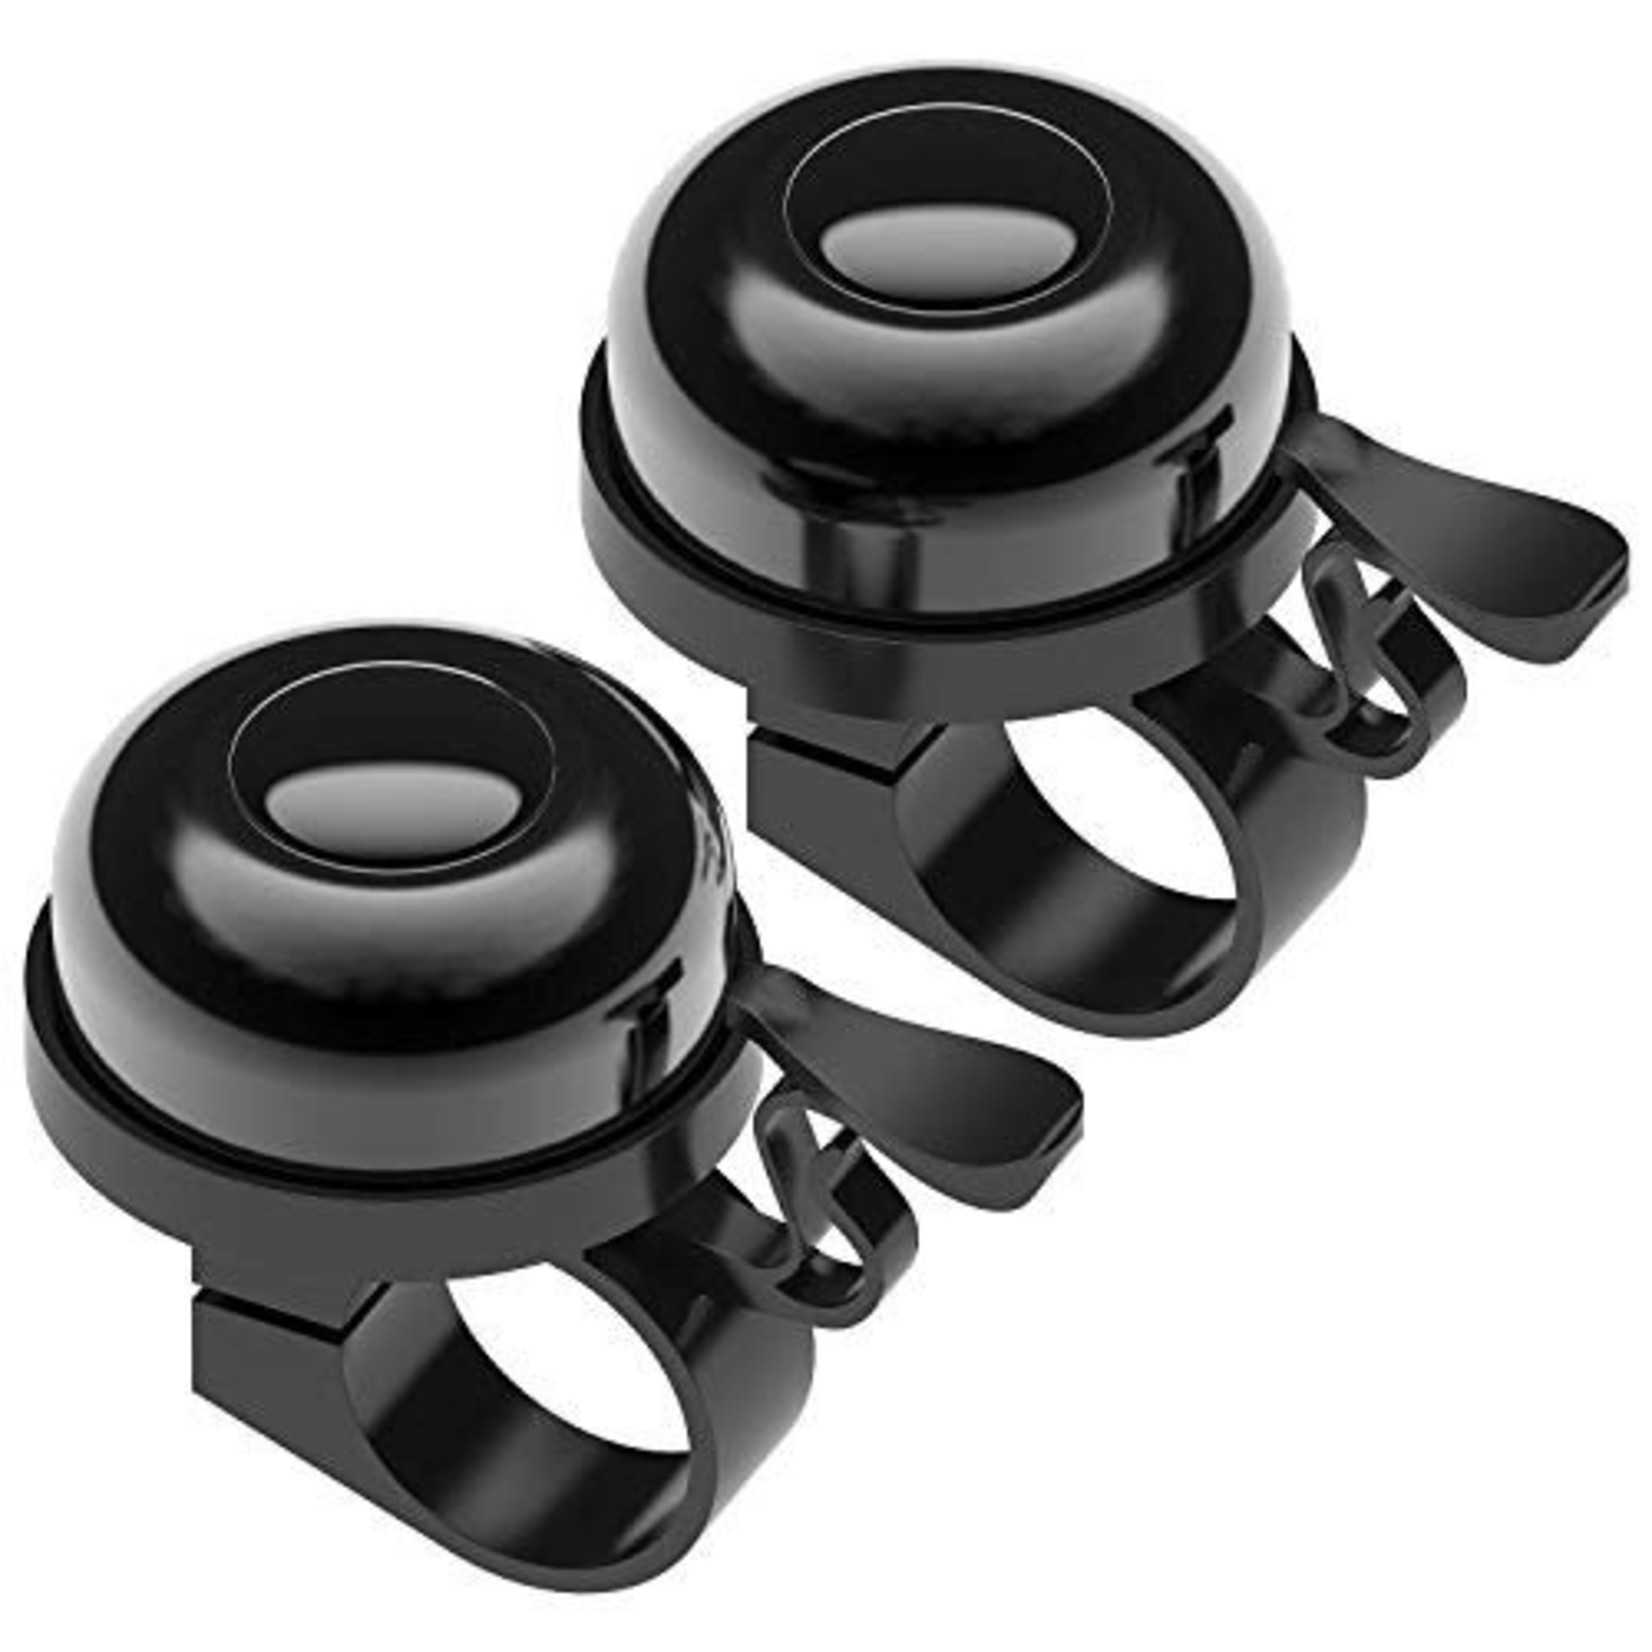 Sportout Bicycle Bell- 2 Pack